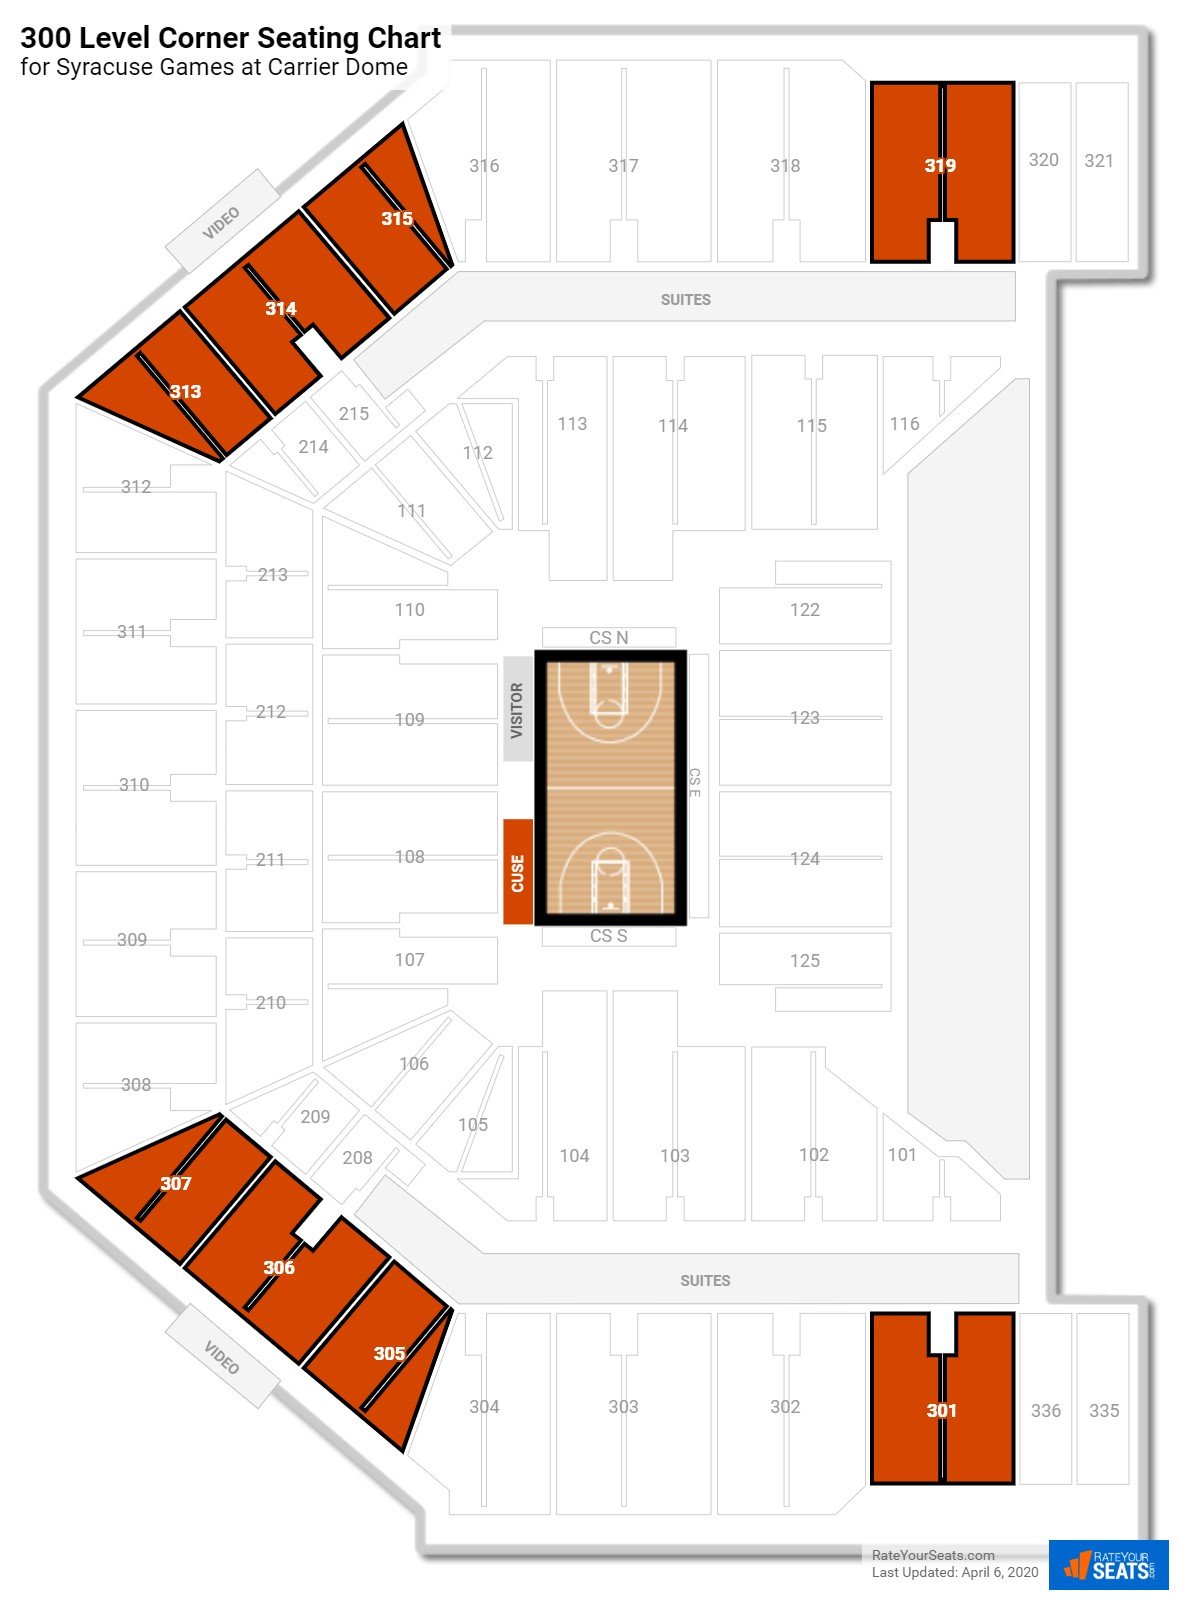 Carrier Dome Courtside Seating Chart